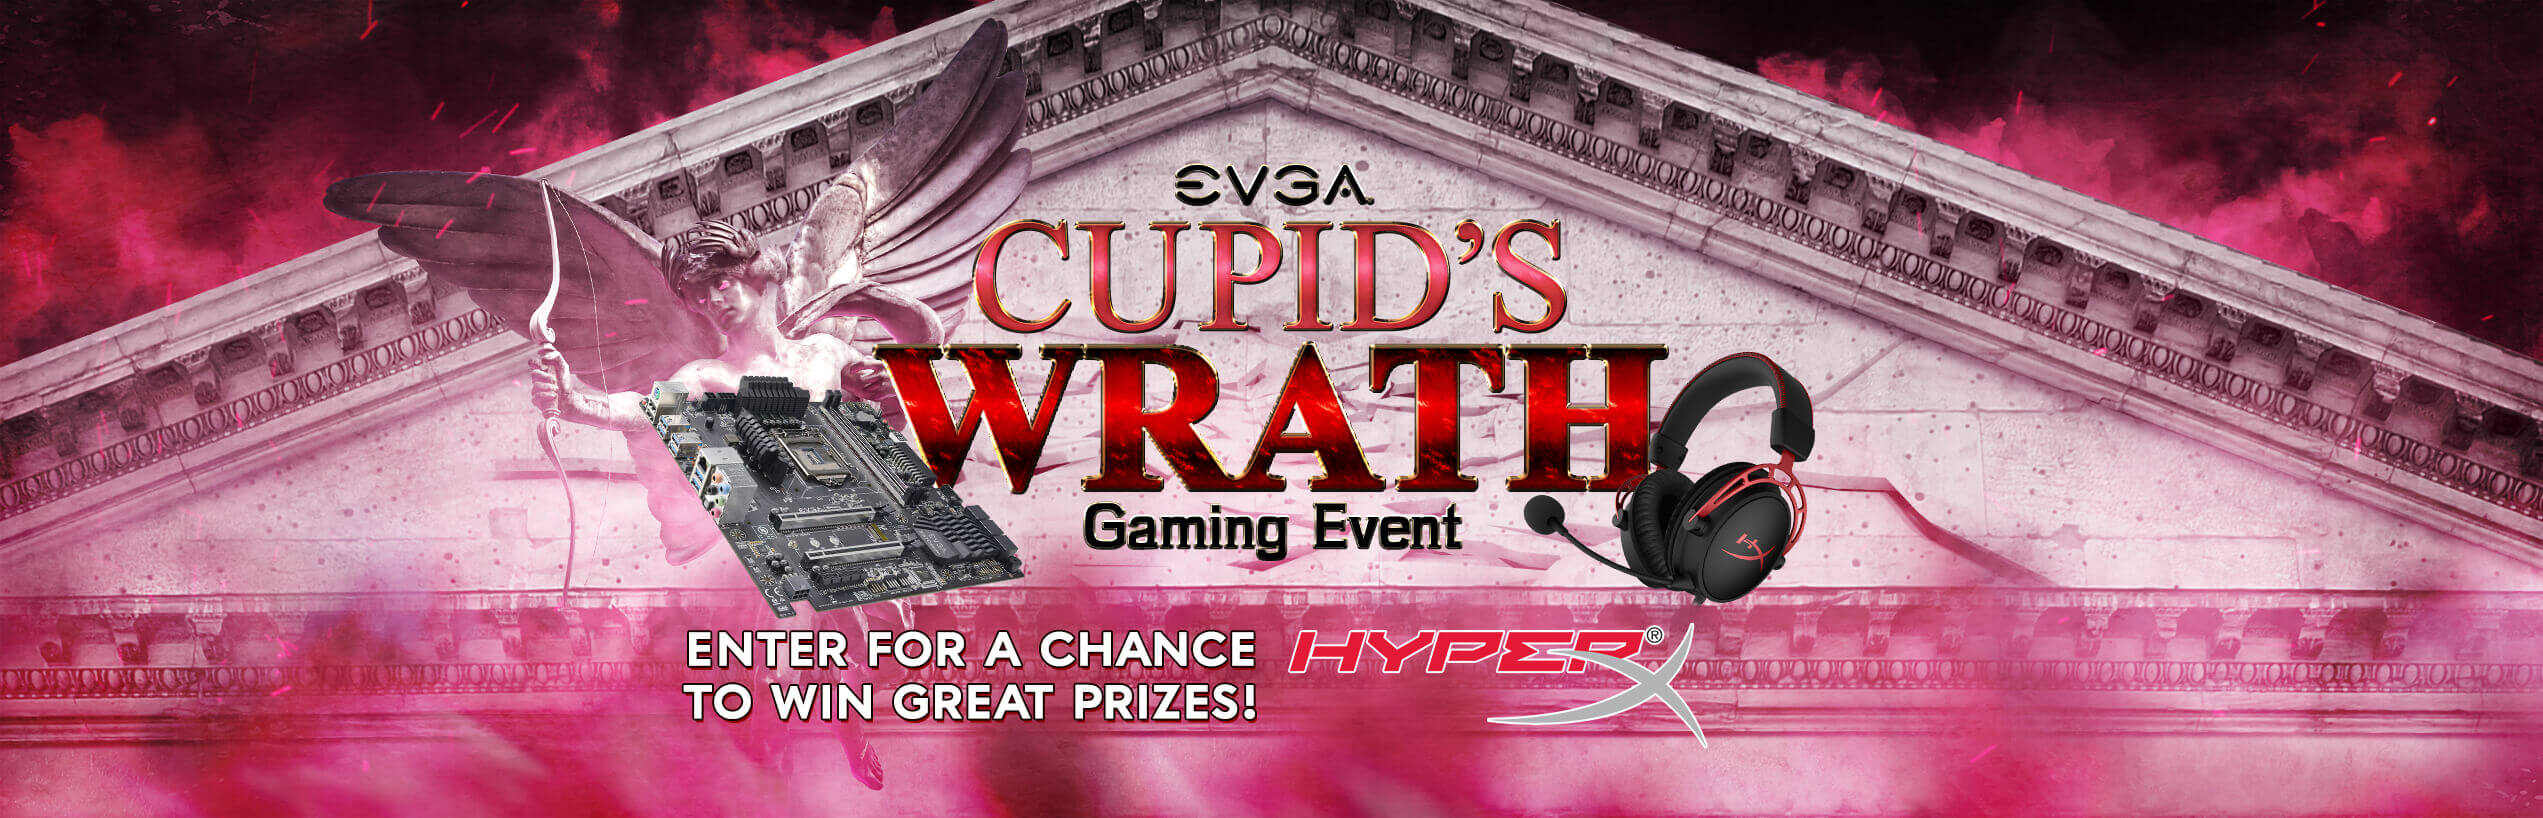 EVGA Cupid's Wrath Gaming Event!